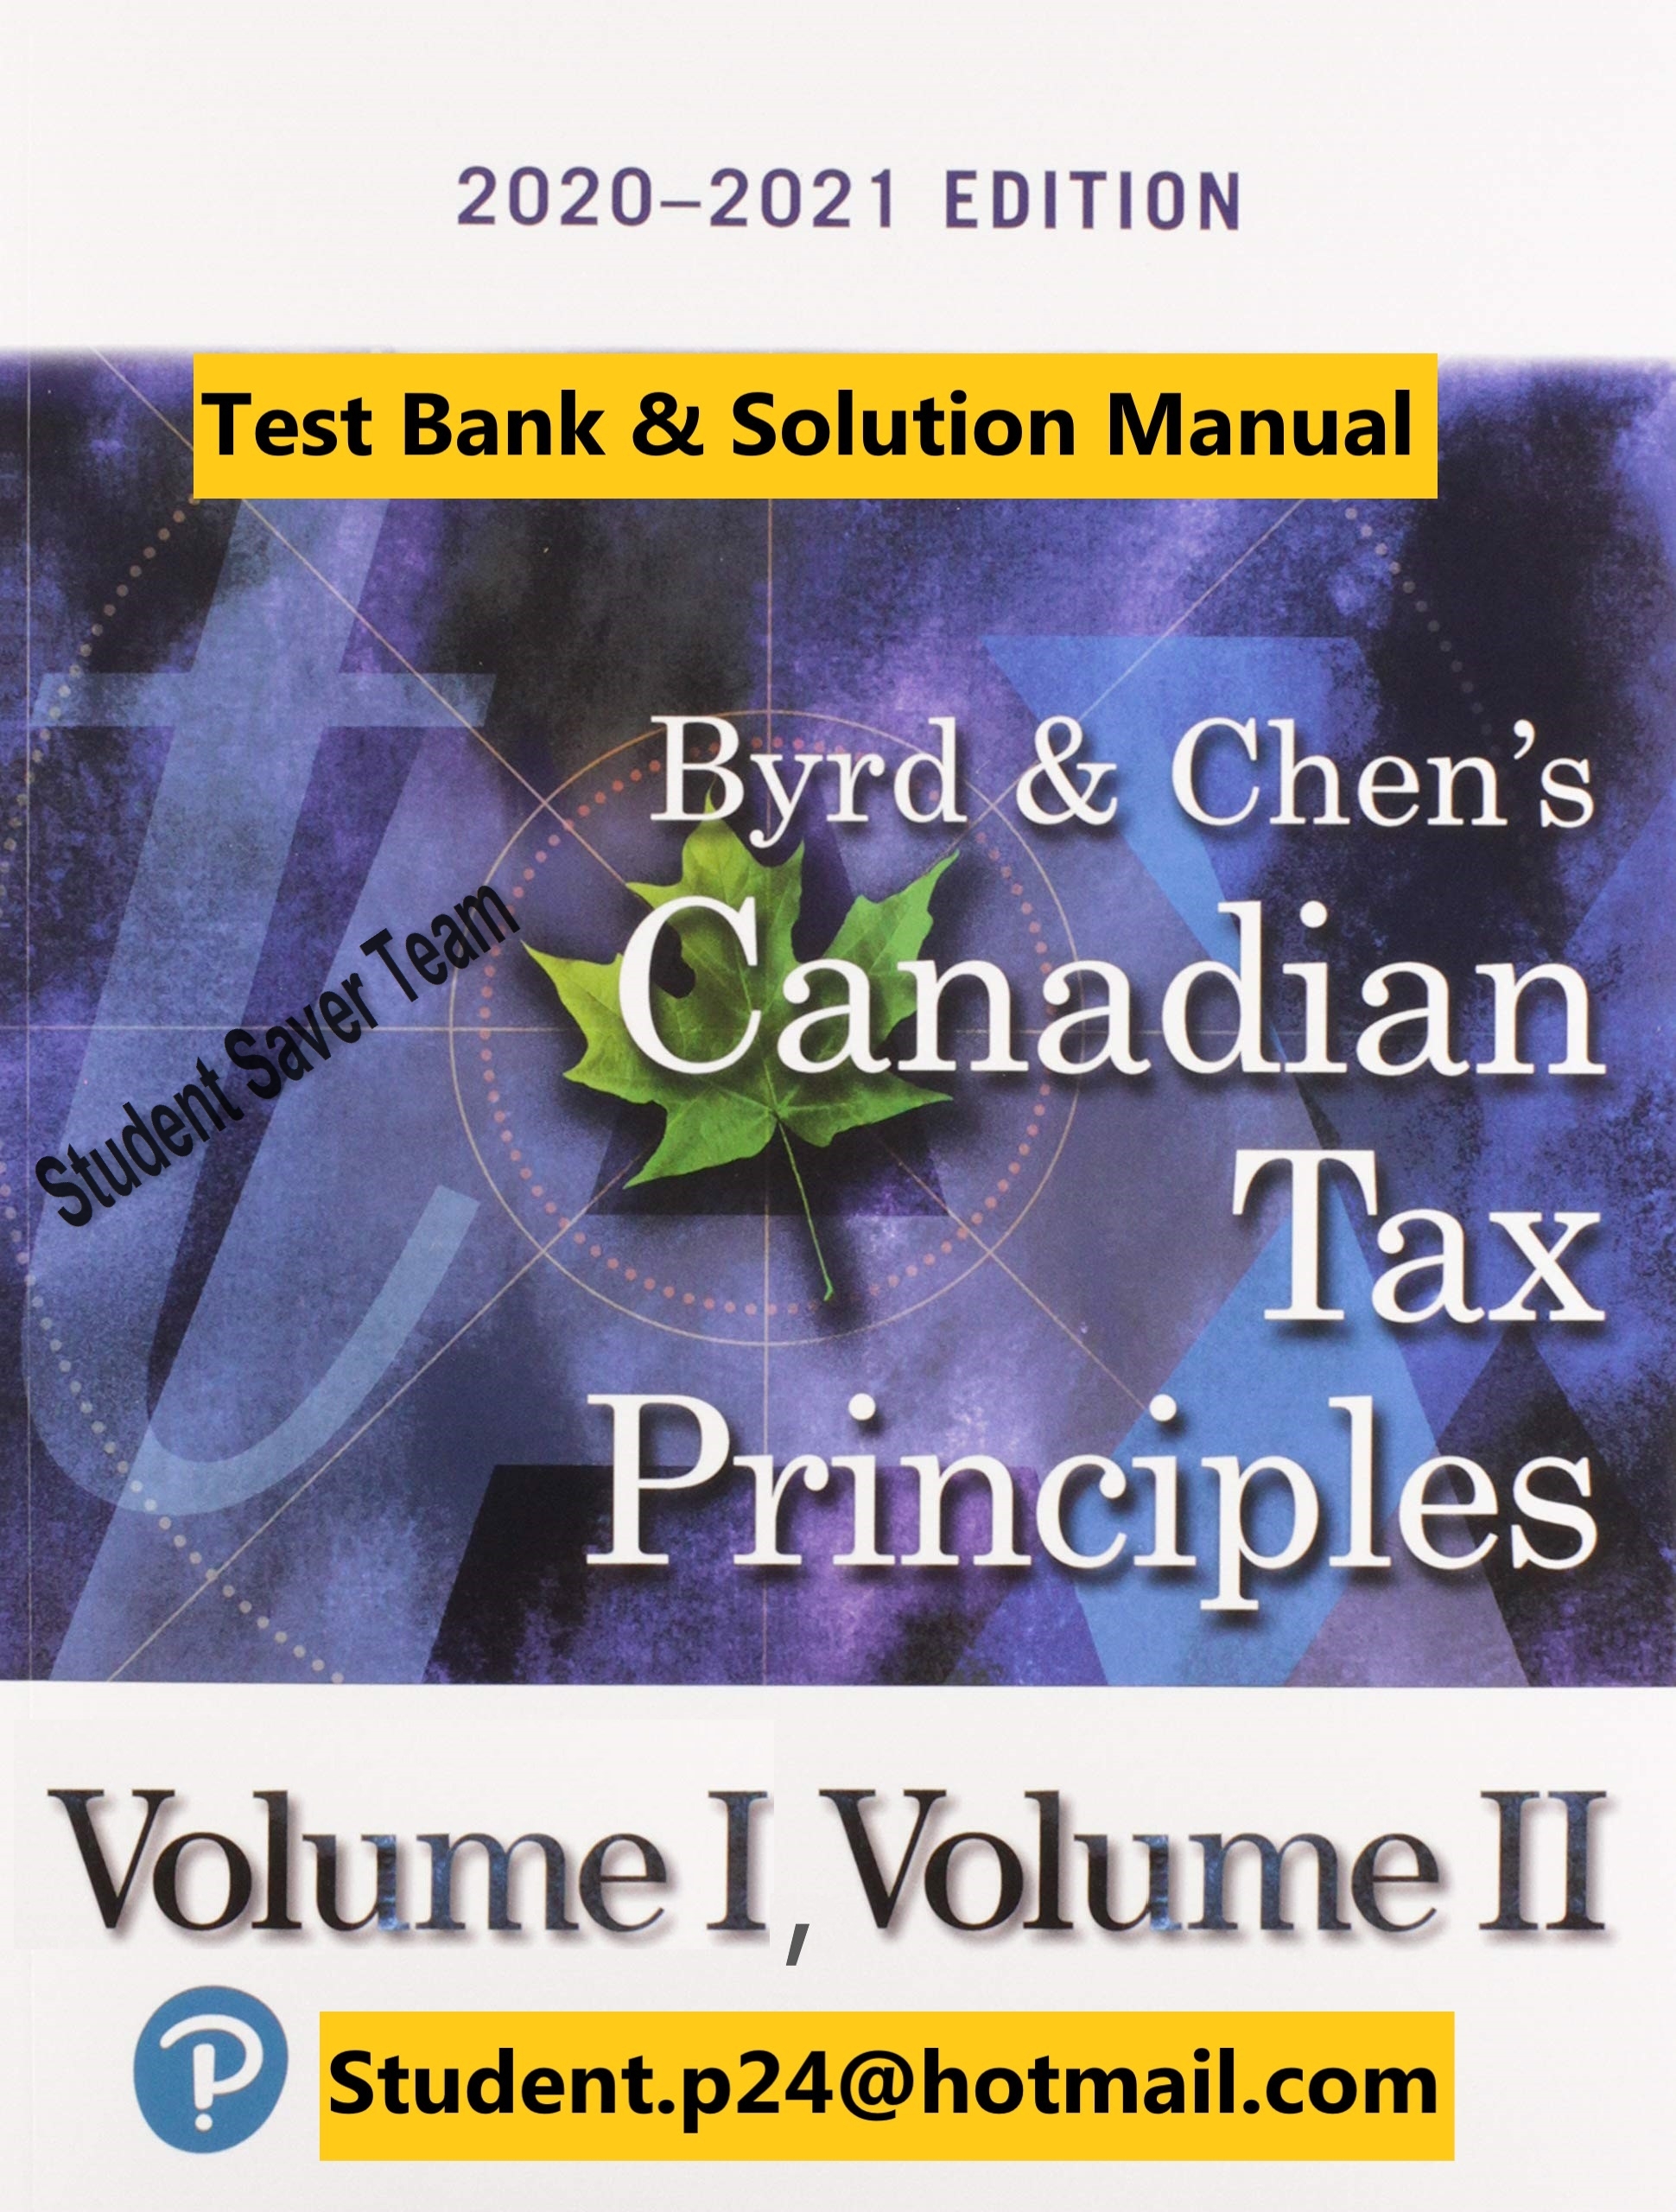 Byrd Chens Canadian Tax Principles 2020 2021 Edition Volumes I and II Clarence Byrd Test Bank and Solution Manual 1